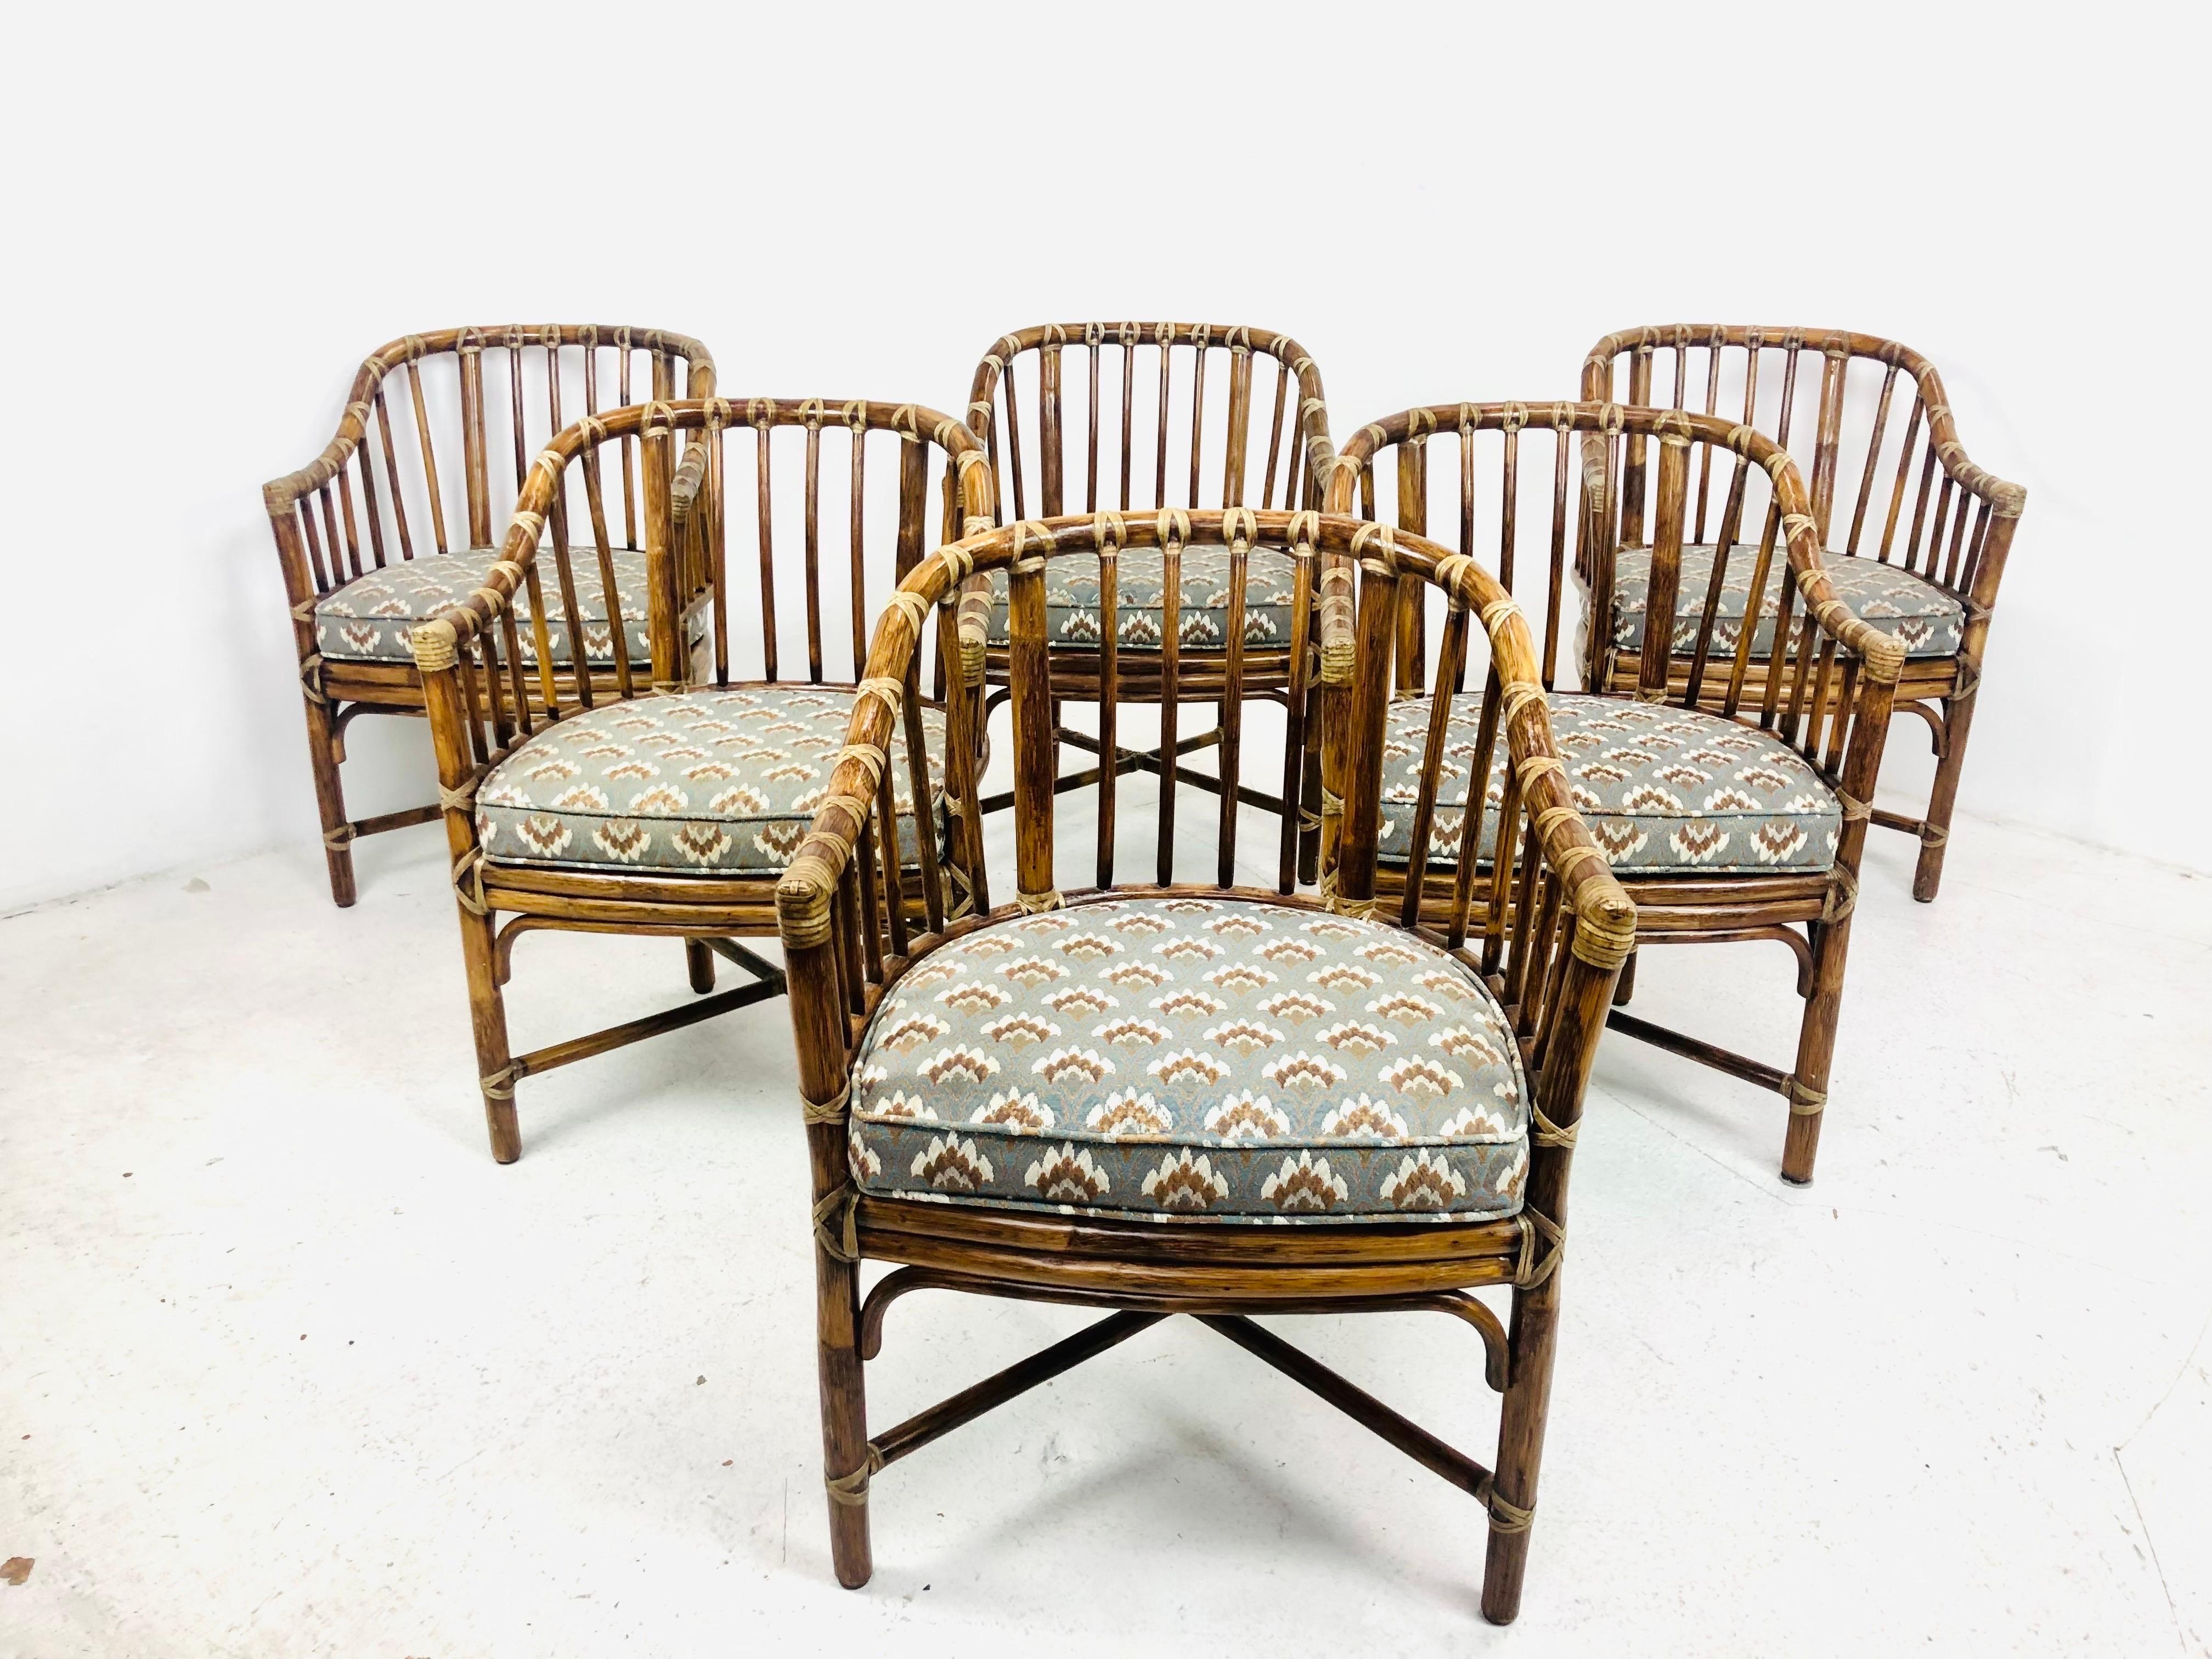 Fantastic set of 6 McGuire rattan dining chairs. Sturdy and in great vintage condition with original brass tags.